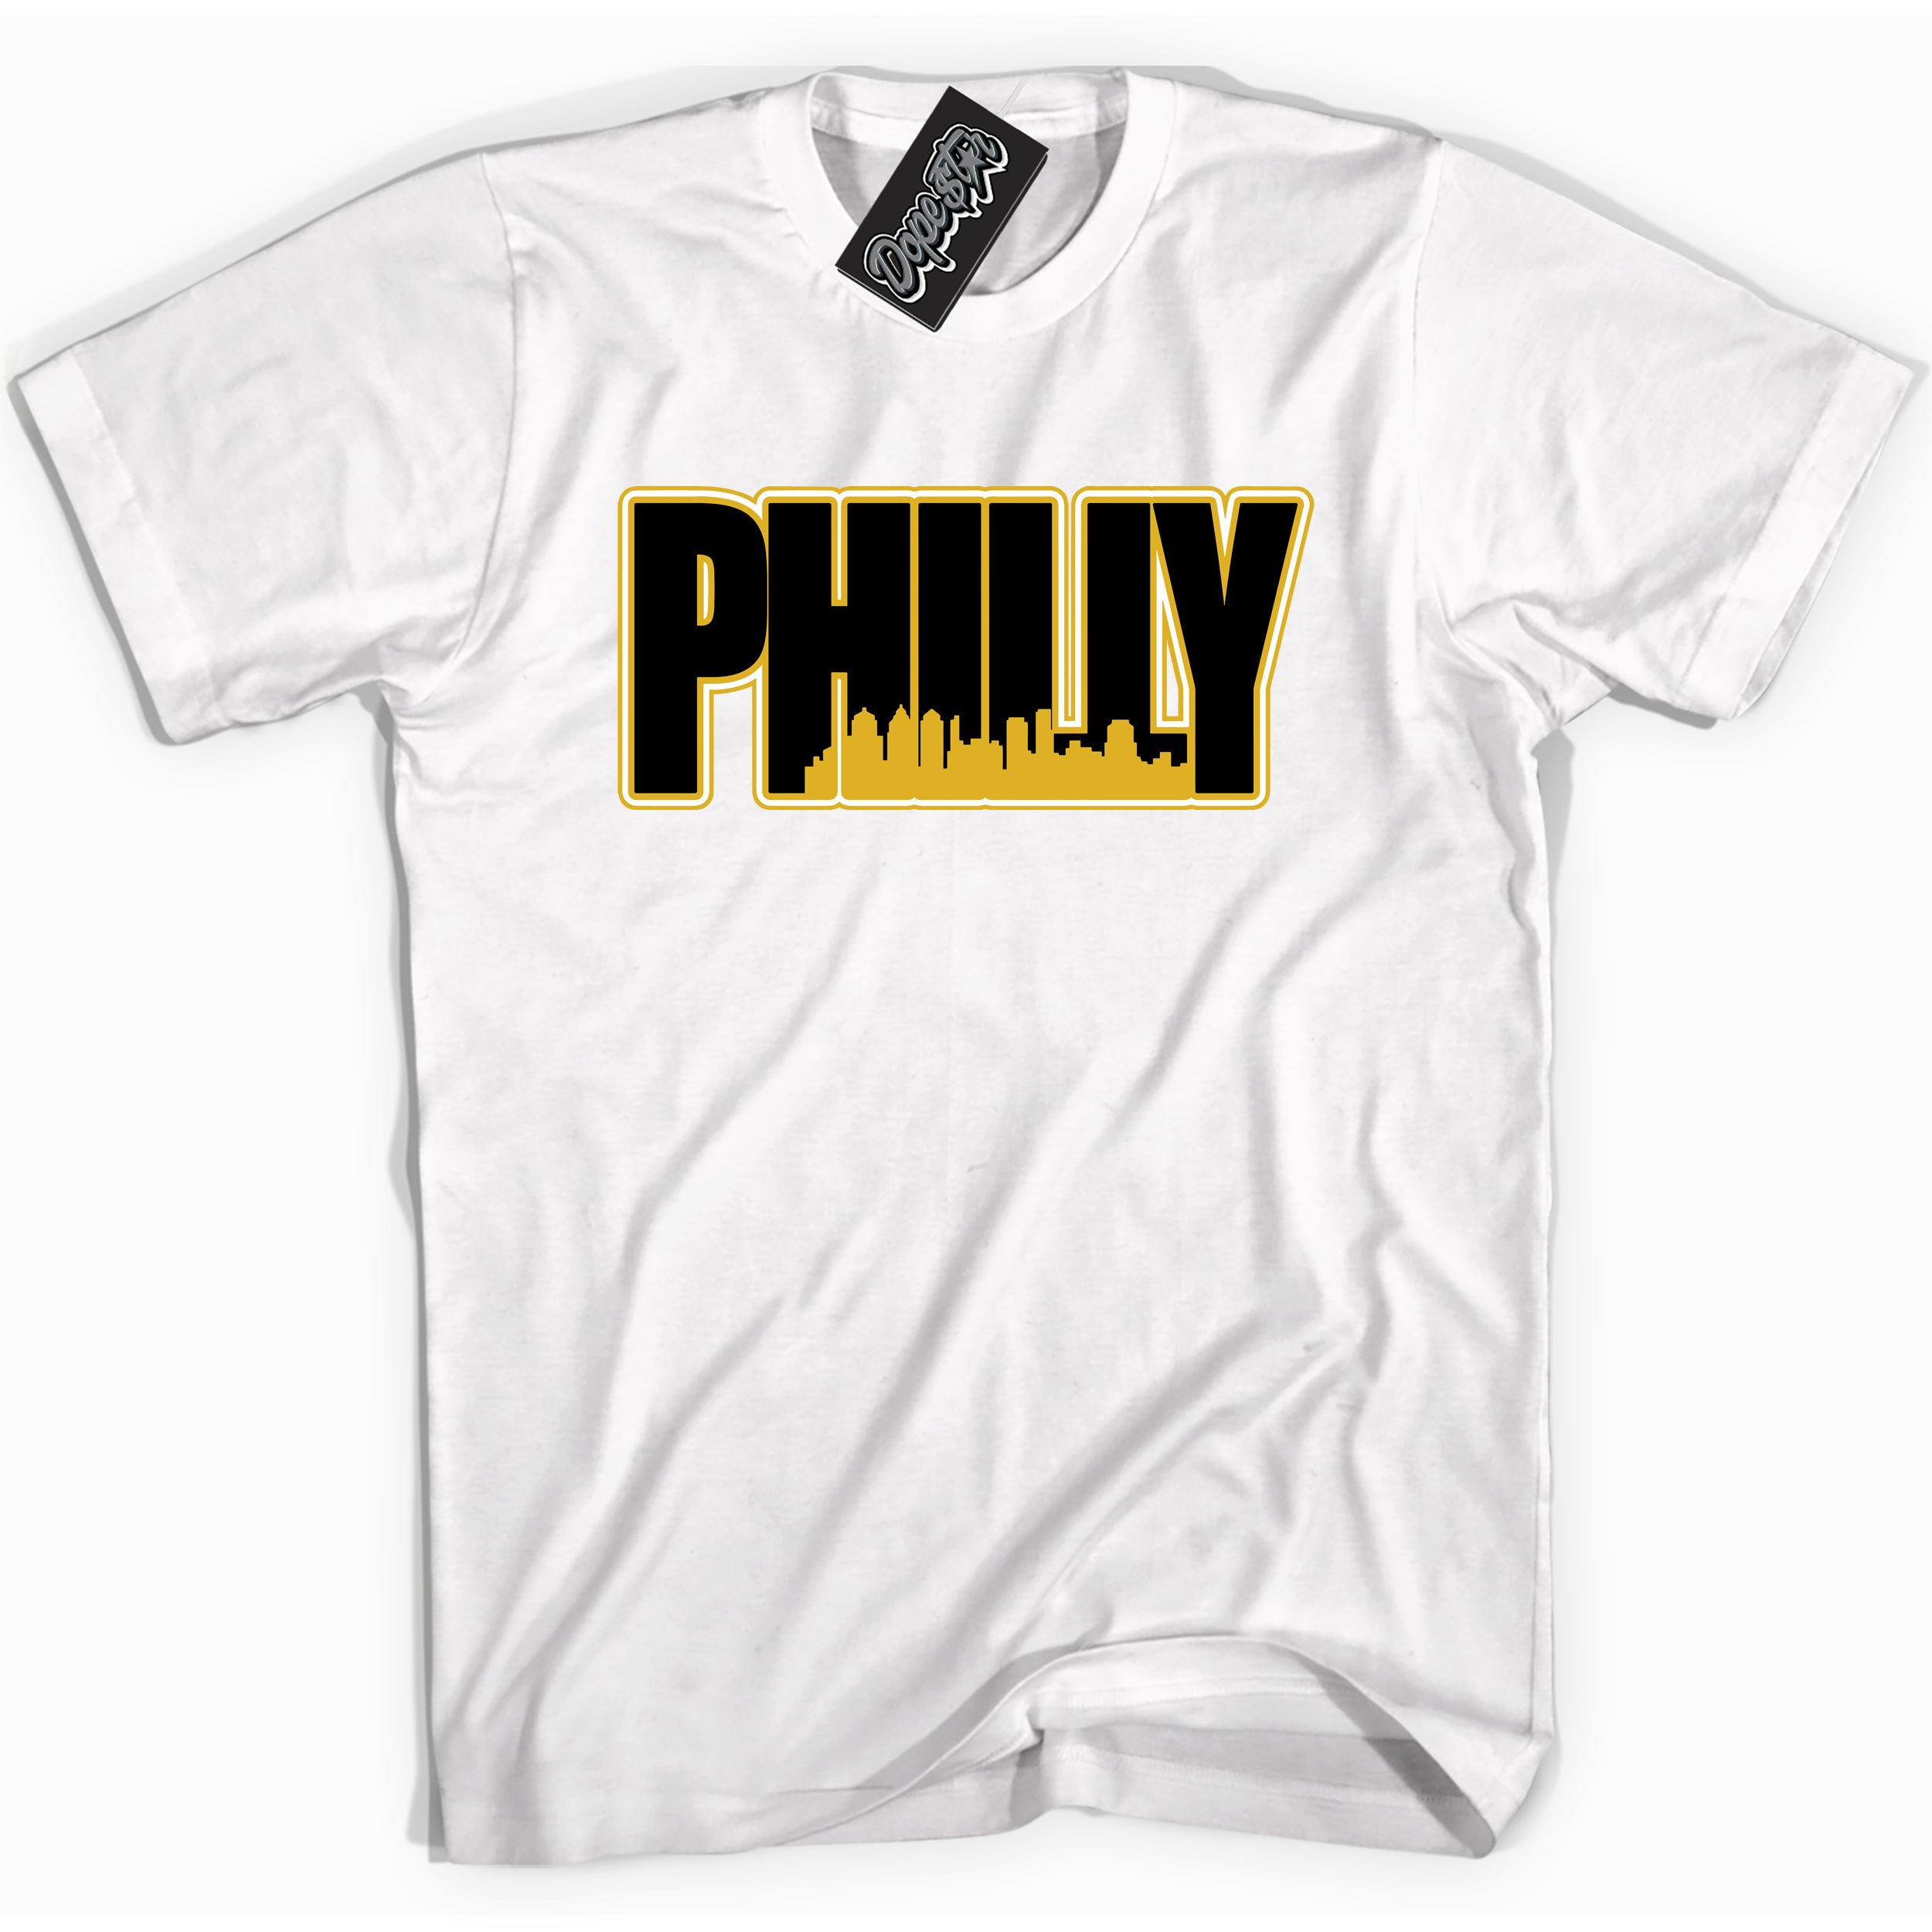 Cool White Shirt with “ Philly” design that perfectly matches Yellow Ochre 6s Sneakers.